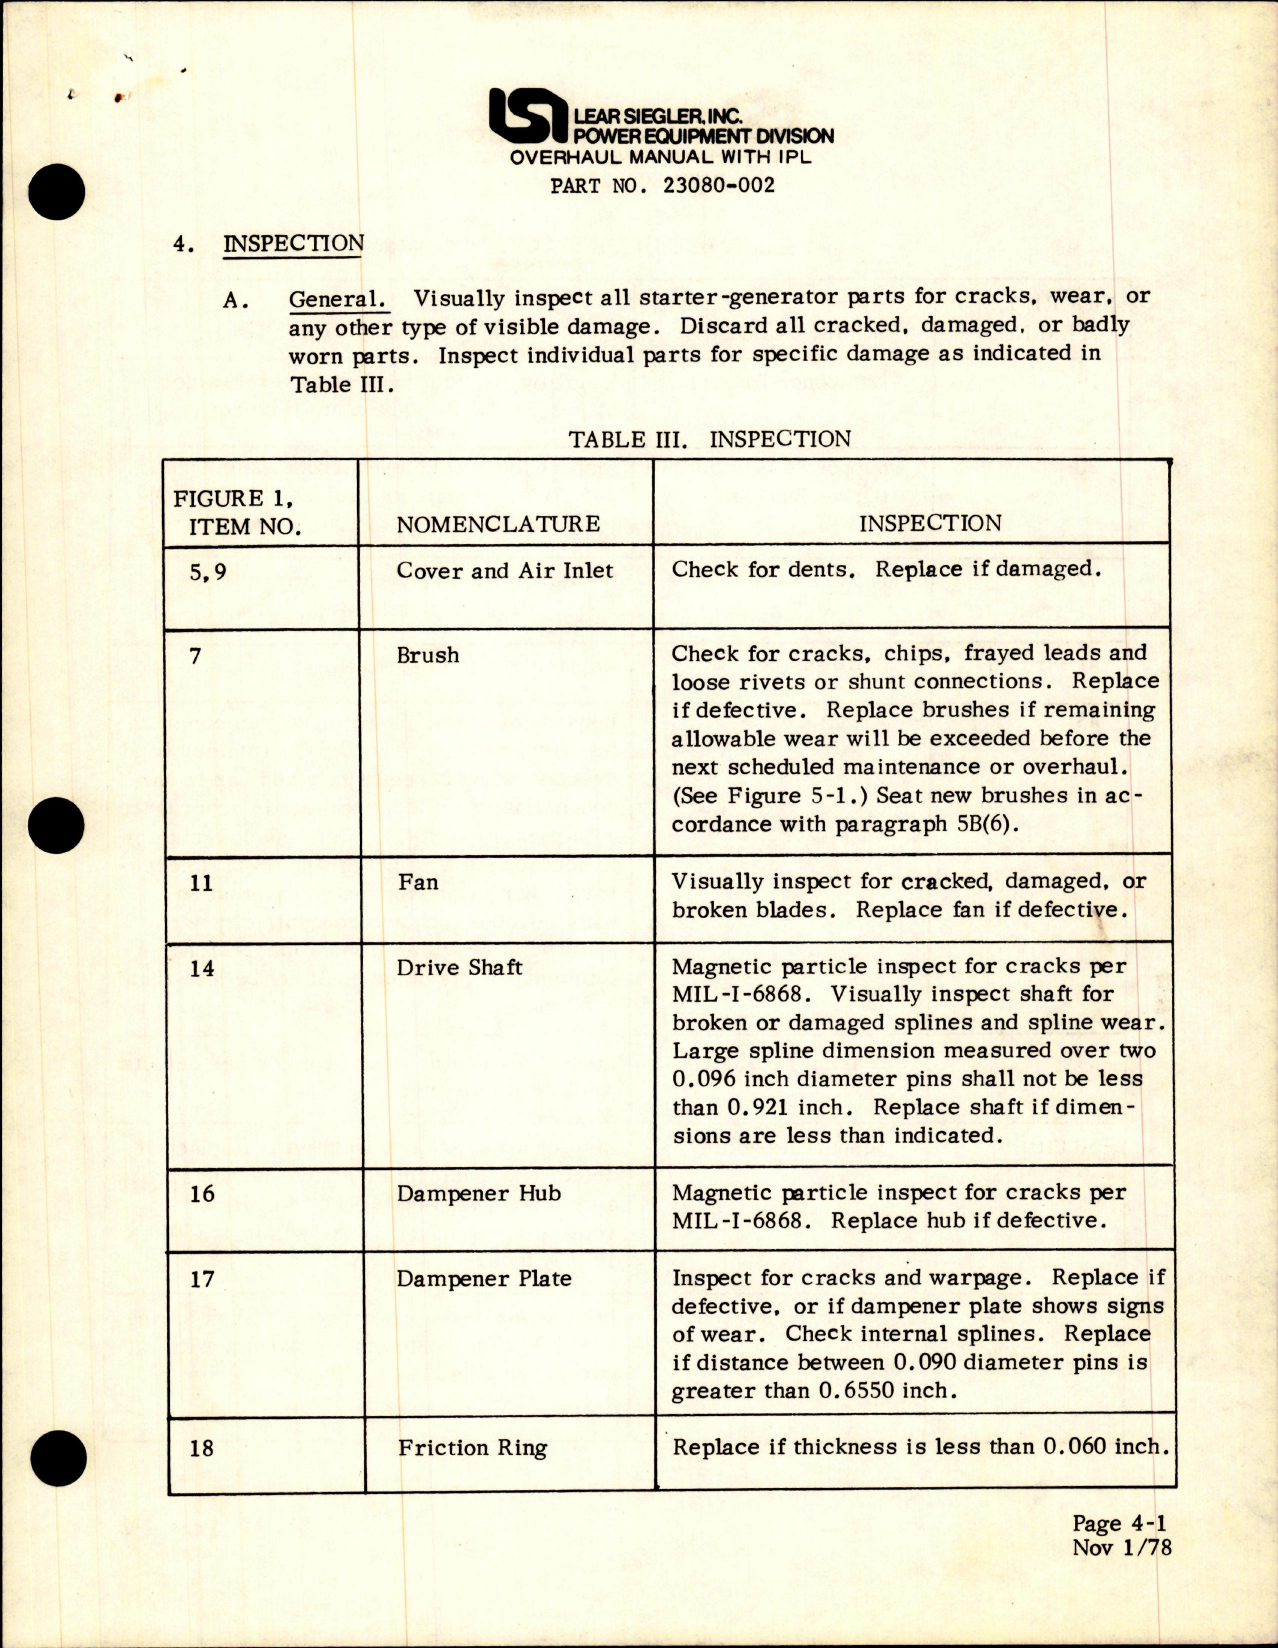 Sample page 9 from AirCorps Library document: Overhaul Manual with Illustrated Parts List for DC Starter Generator - Part 23080 Series